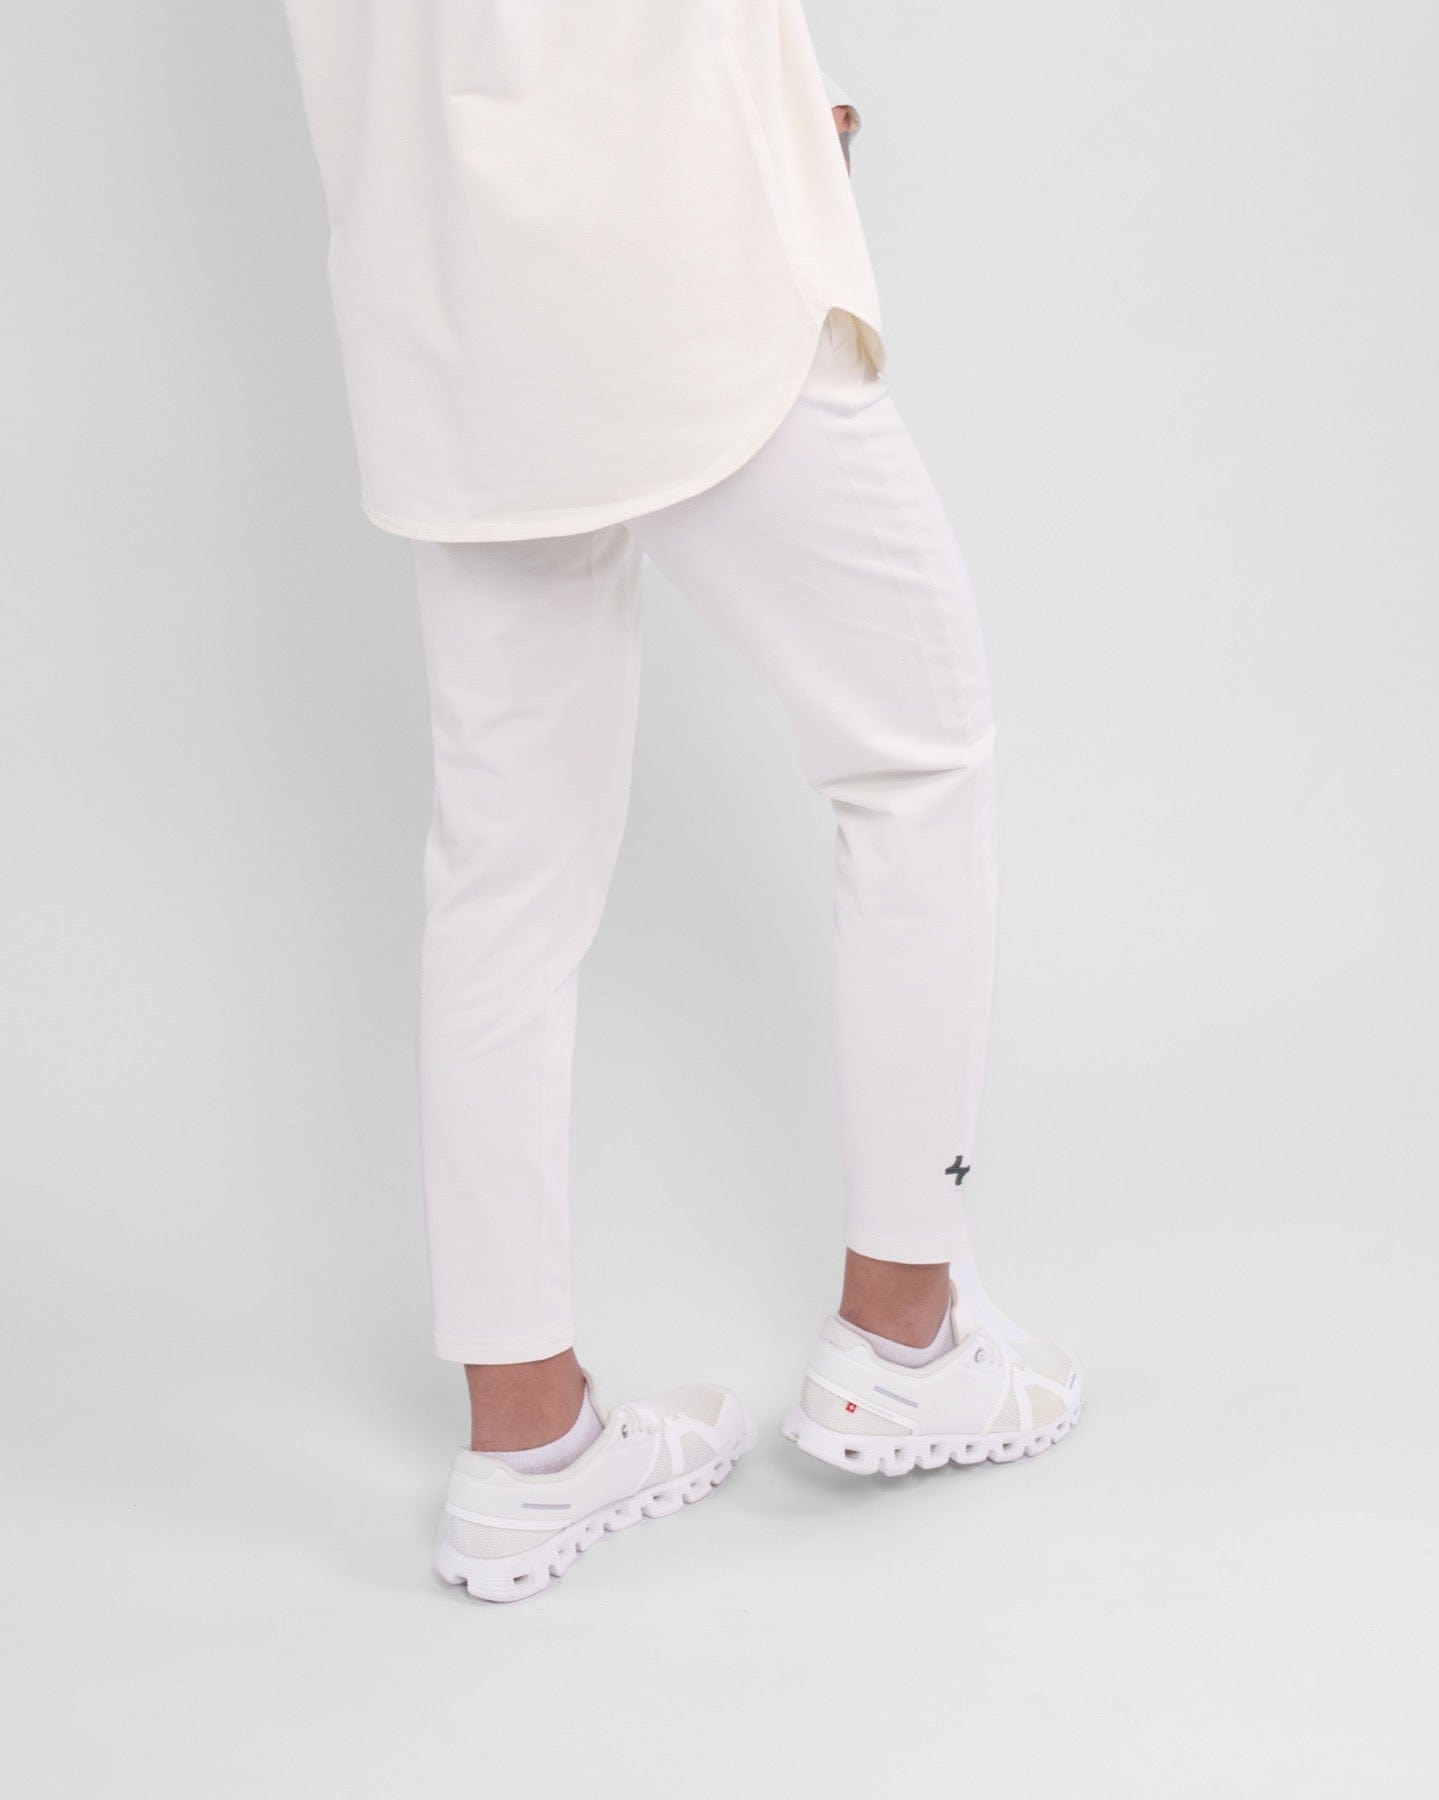 A close-up of a woman's lower legs clad in high-waisted, Off White CANTARA PANTS and white sneakers, highlighting modest sportswear by qynda.